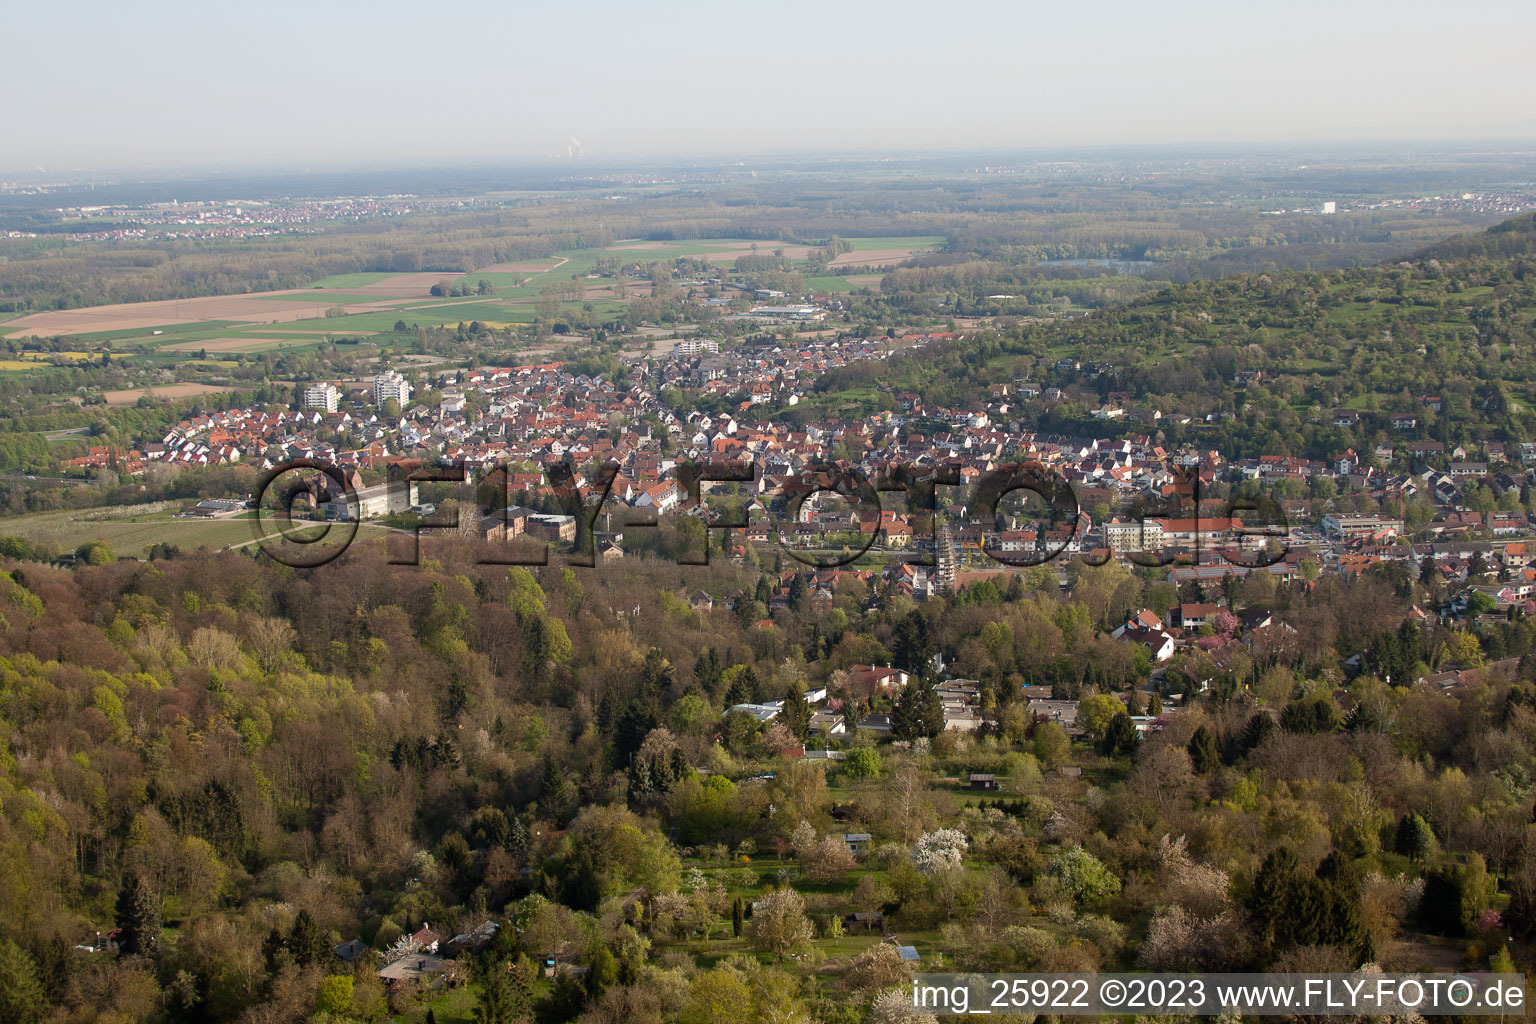 Aerial photograpy of From the south in the district Grötzingen in Karlsruhe in the state Baden-Wuerttemberg, Germany